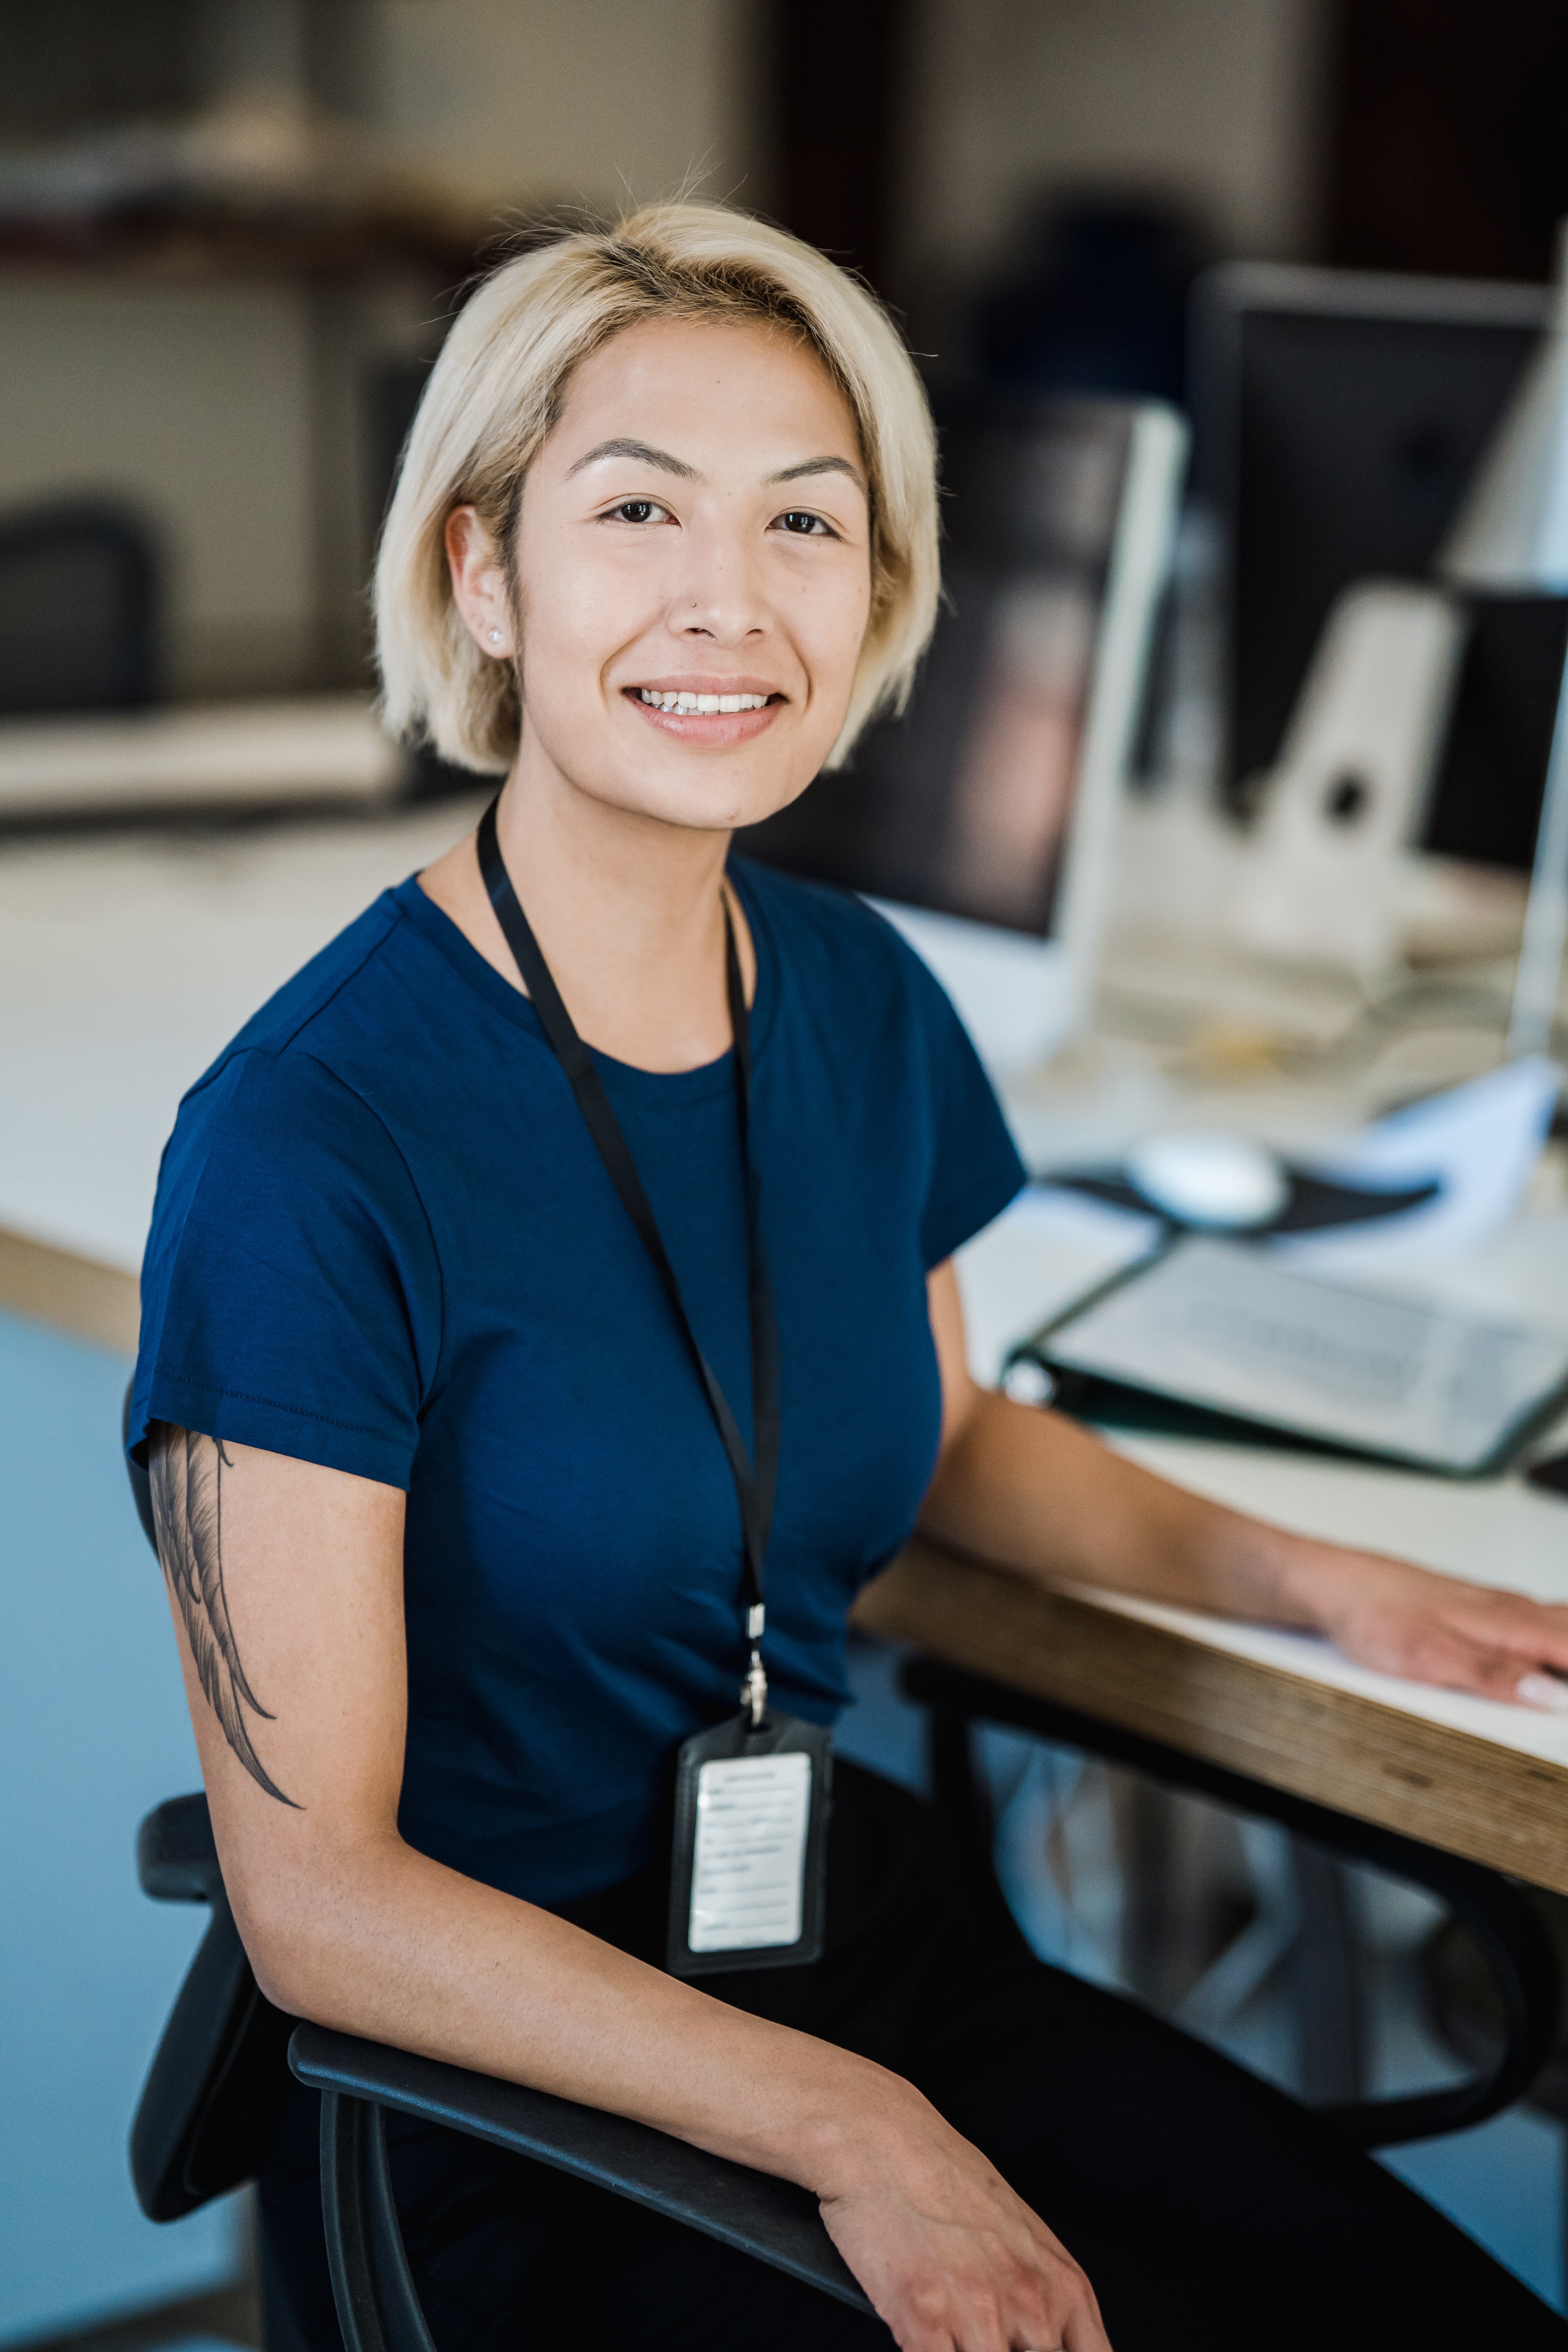 Smiling employee sitting at a desk with folders and screens in the background